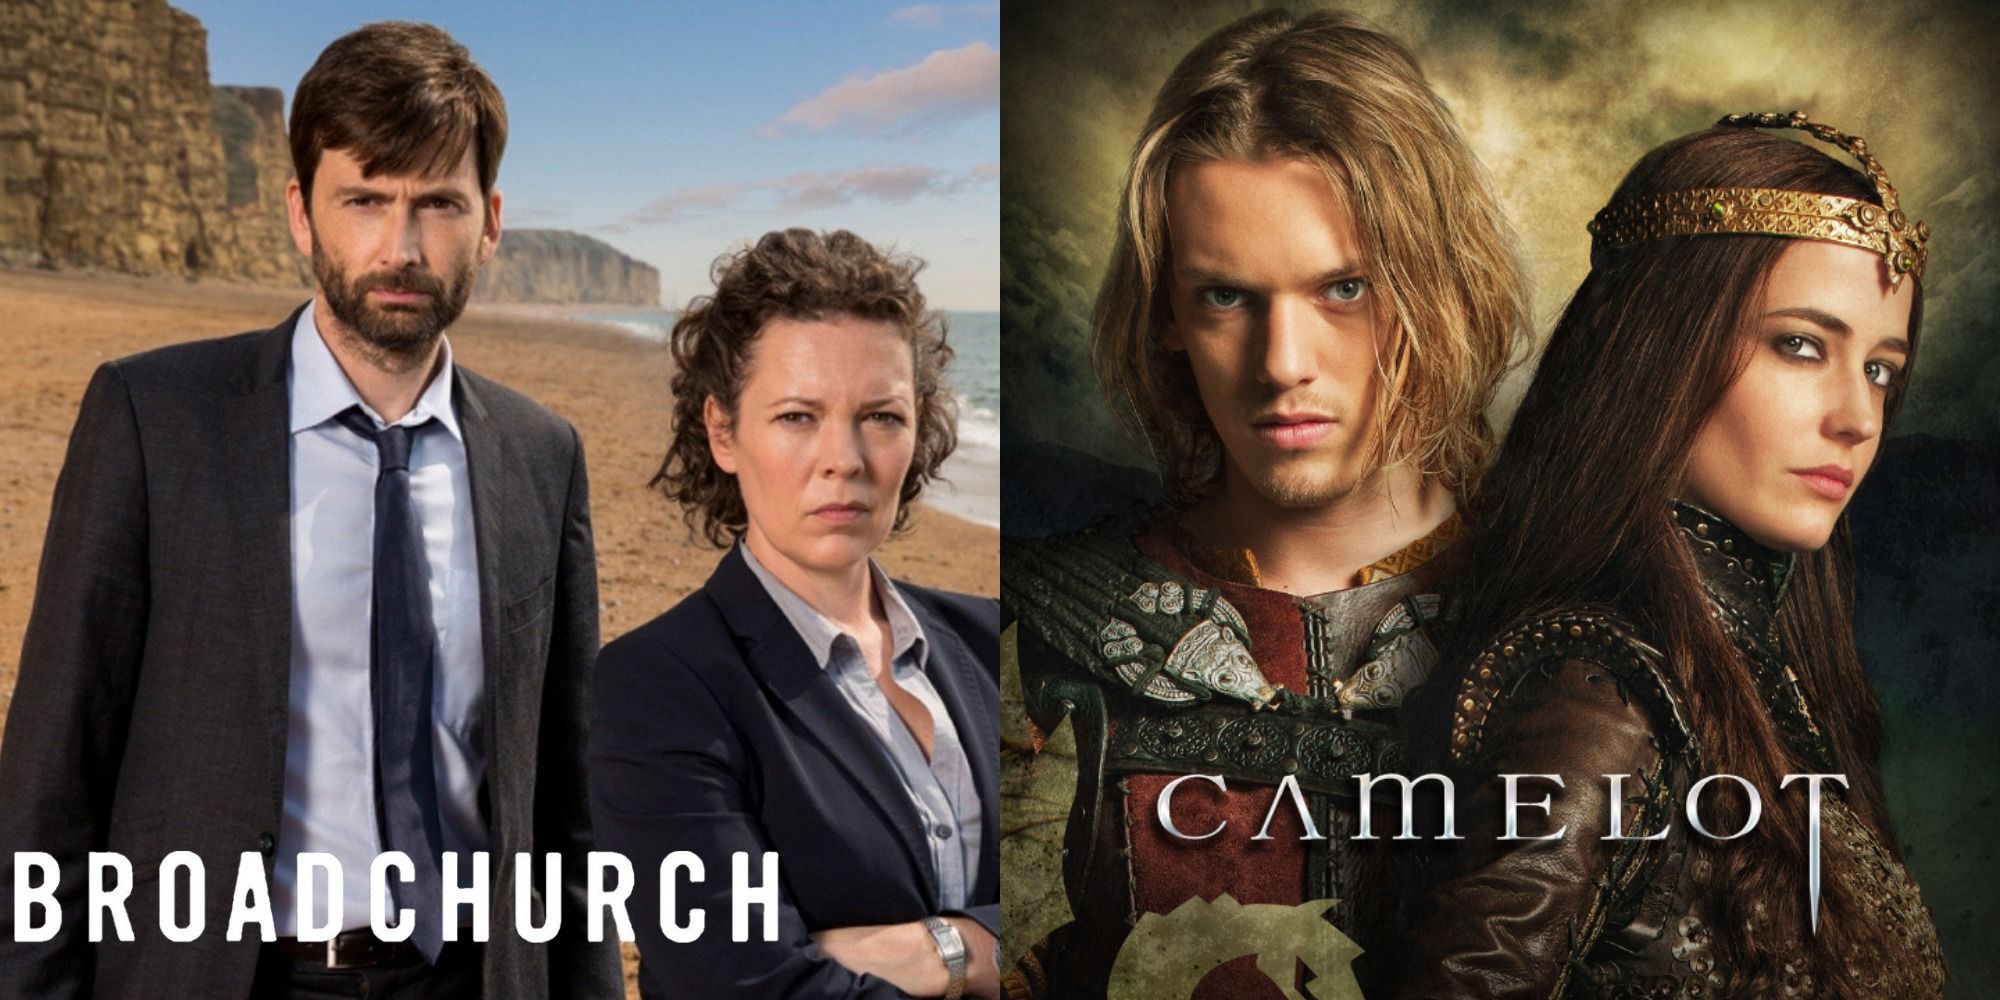 Split image showing posters for Broadchurch and Camelot